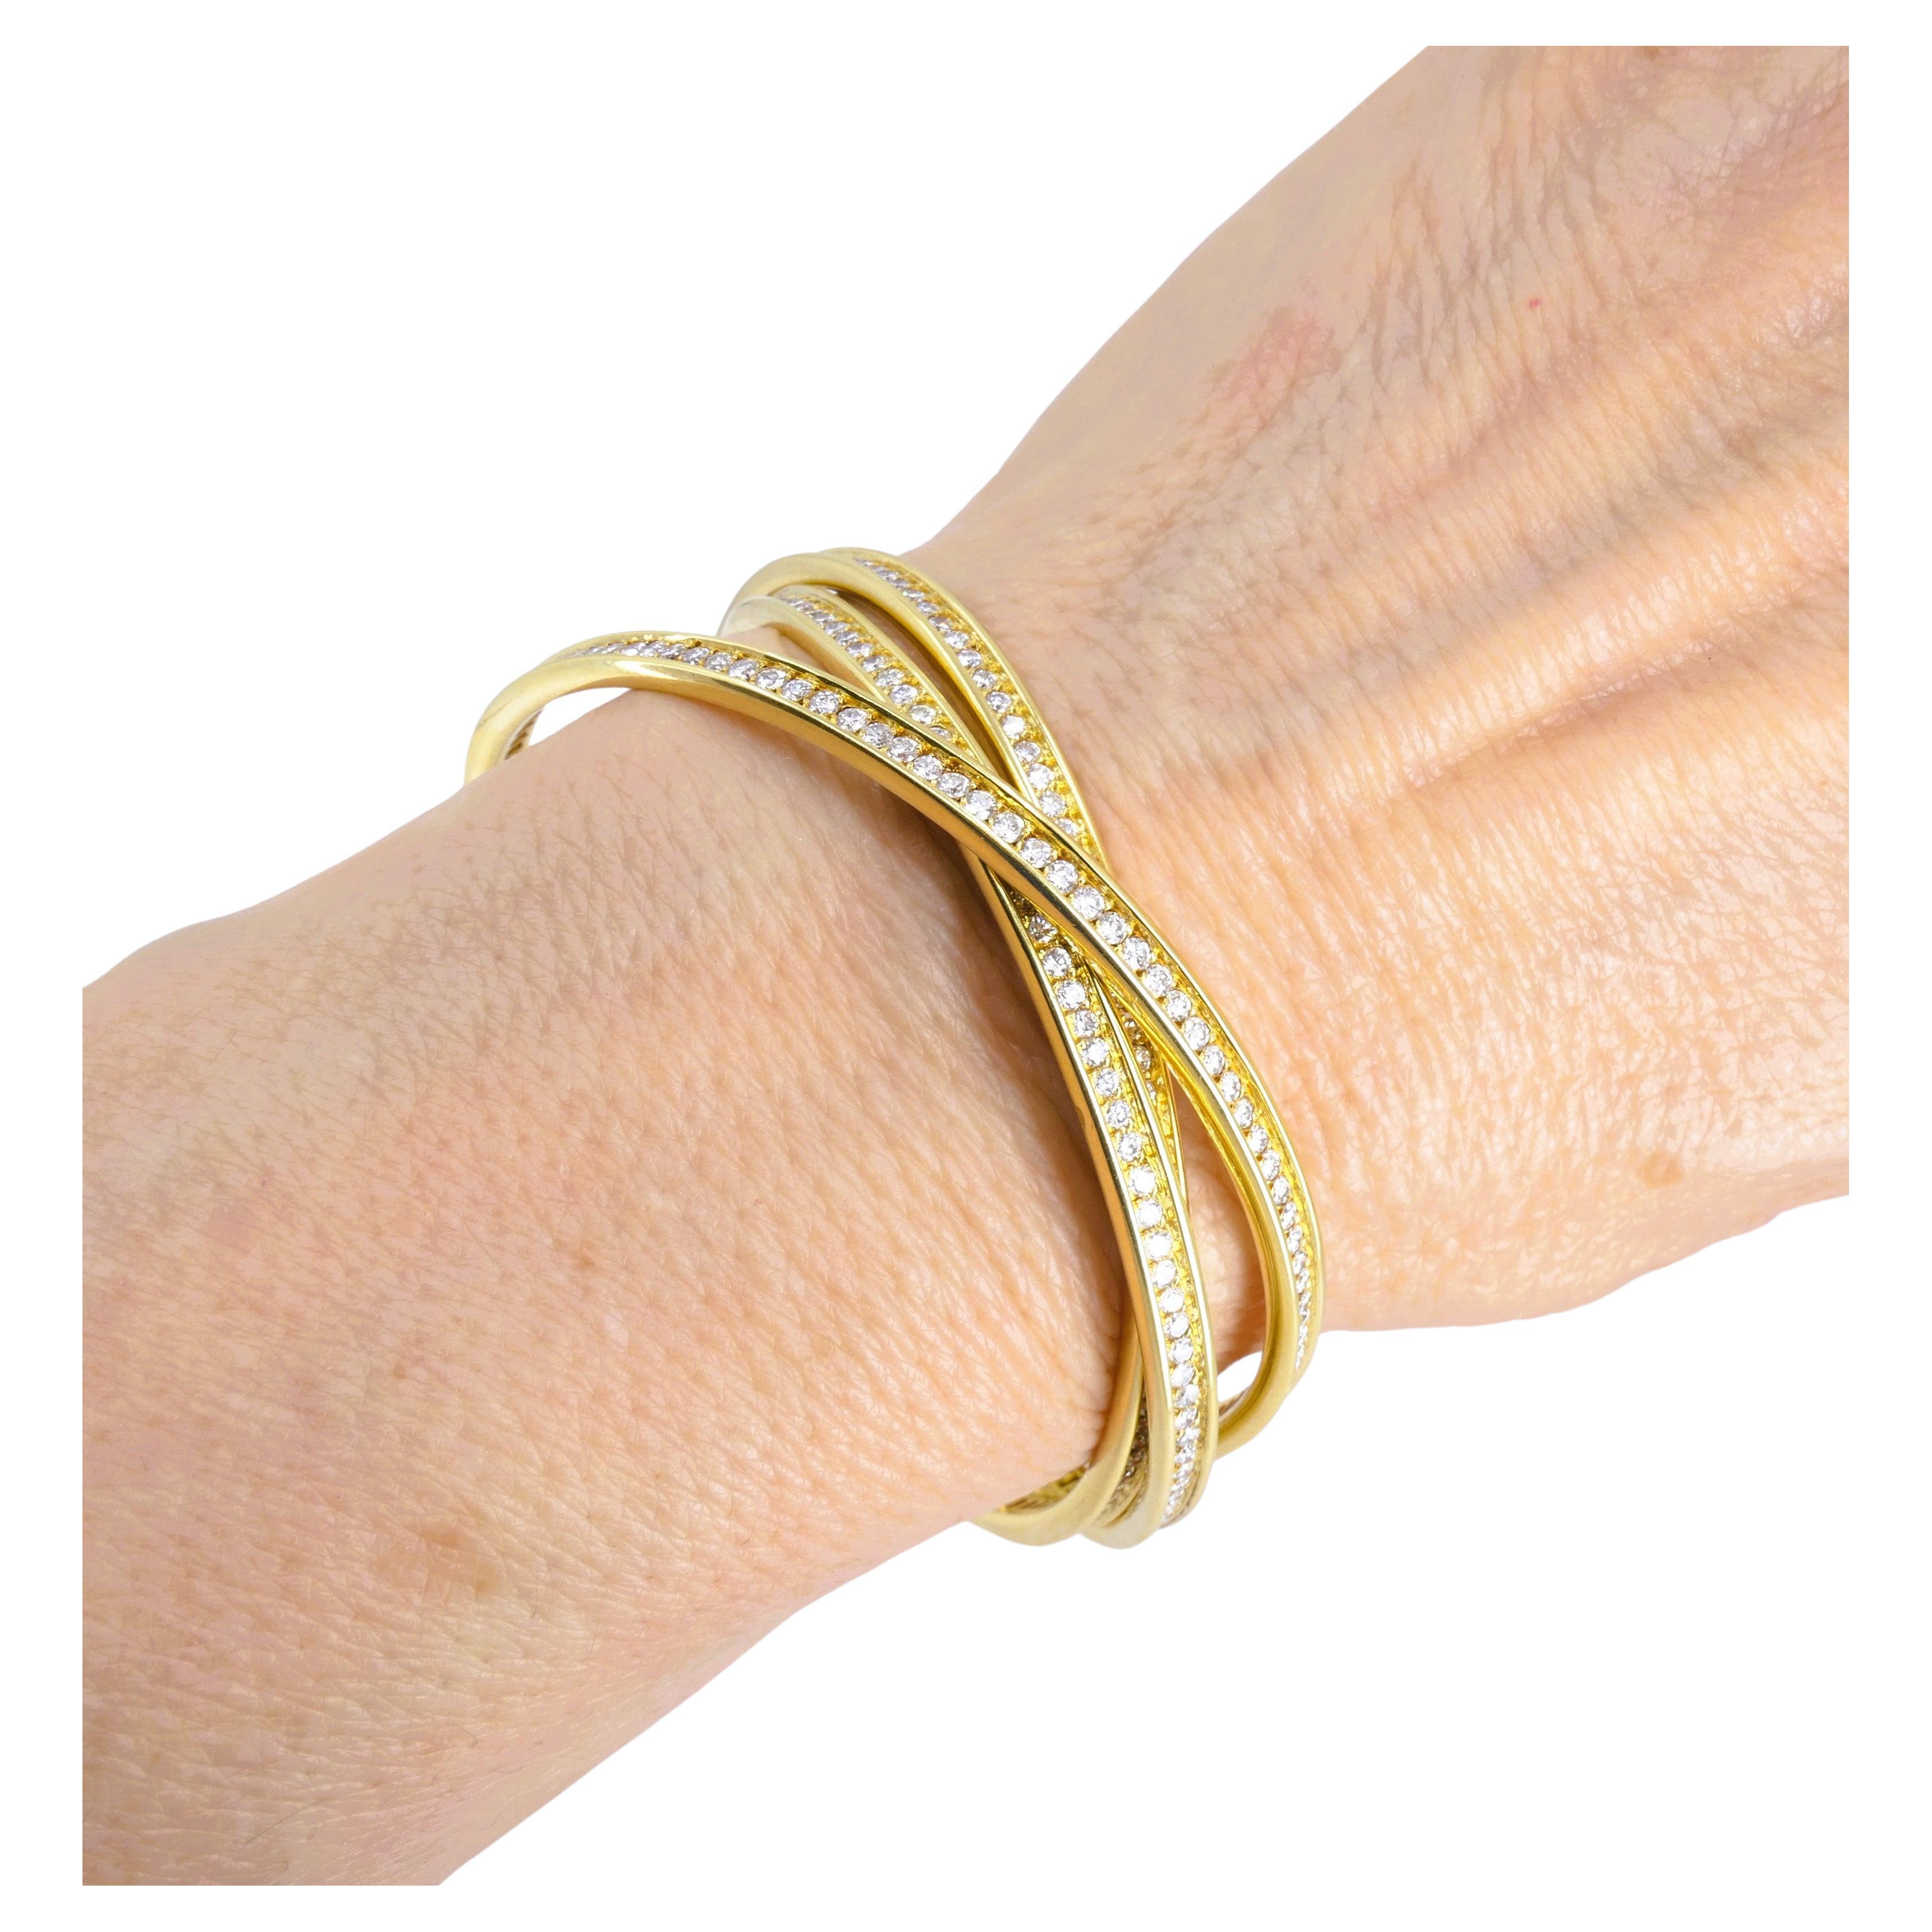 A Cartier Trinity bracelet made of 18k gold and round full cut diamonds.
The piece consists of three interlocked bangle bracelets. The diamonds are four-prong set and run throughout the length of the bracelets. The slender bracelets are graceful and